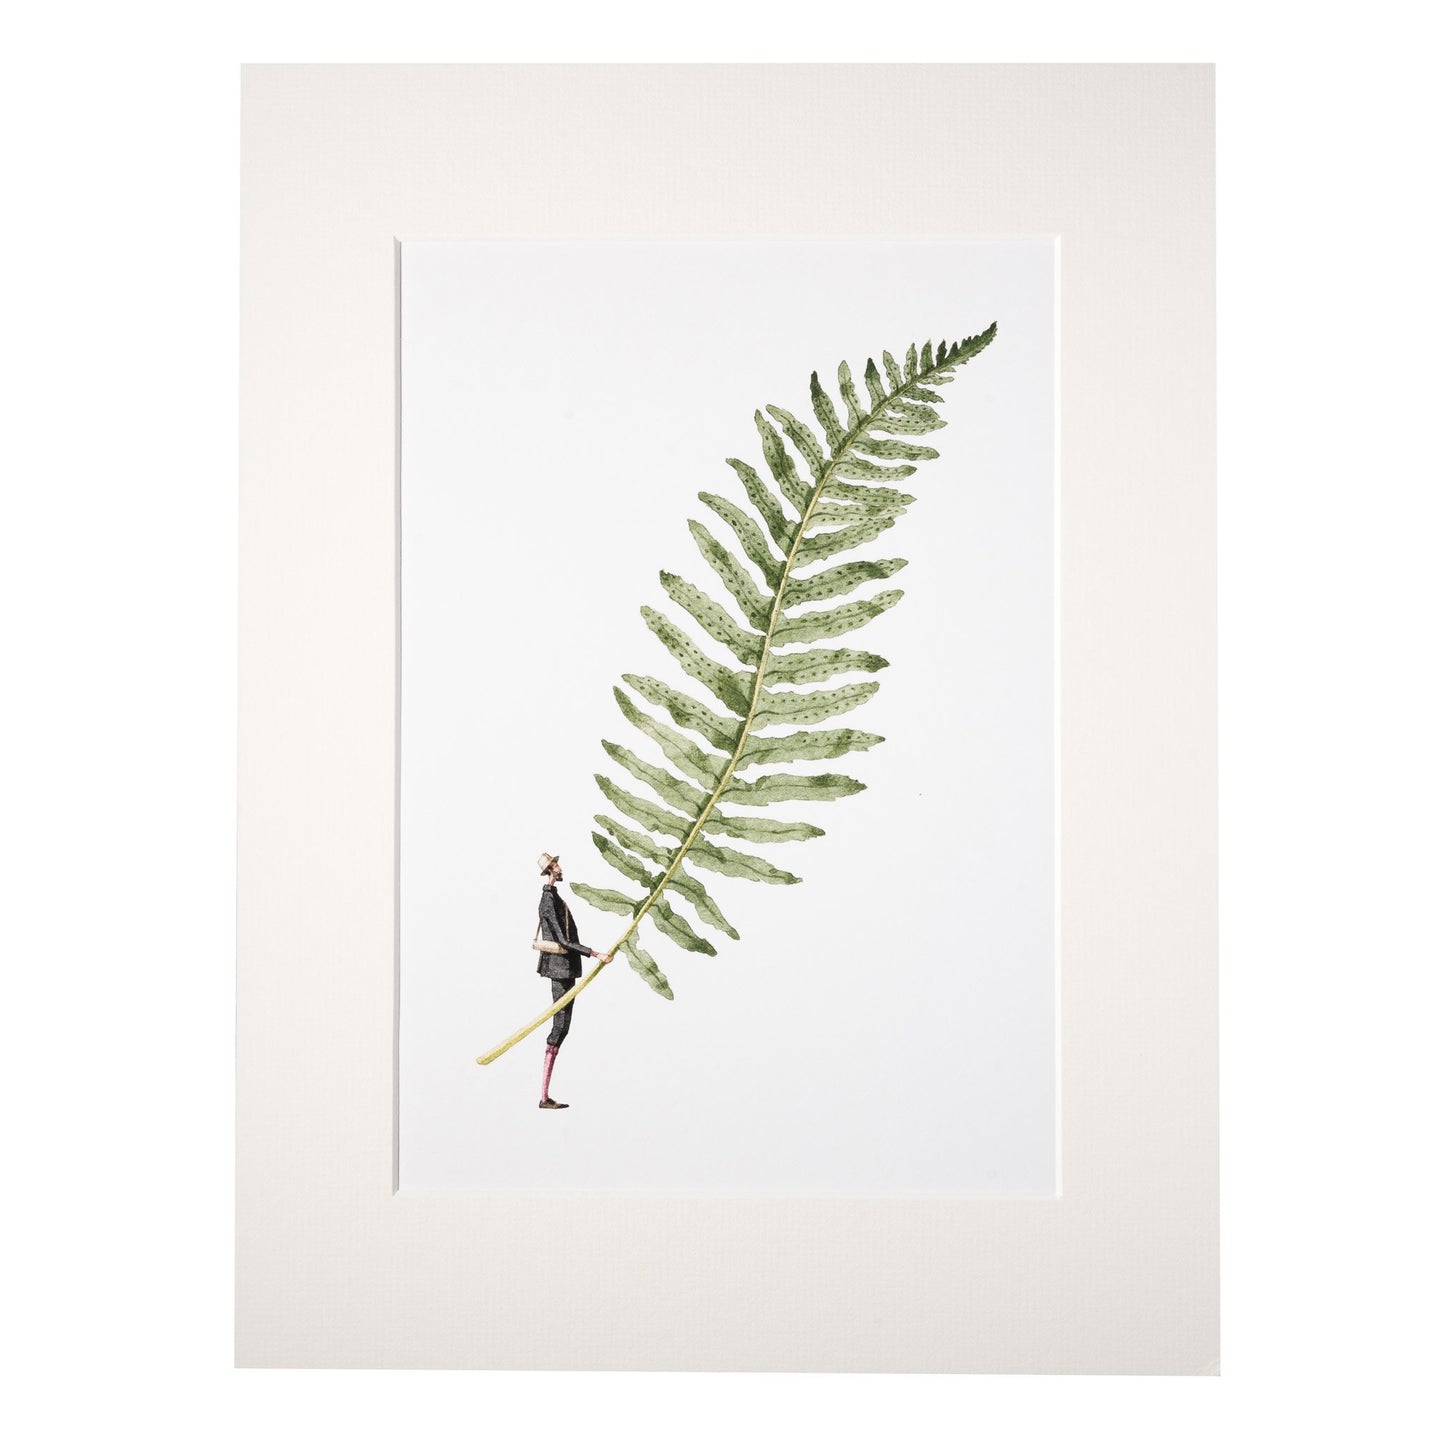 giclee print, mounted print, print, illustration, made in england, ferns, archival paper, art print